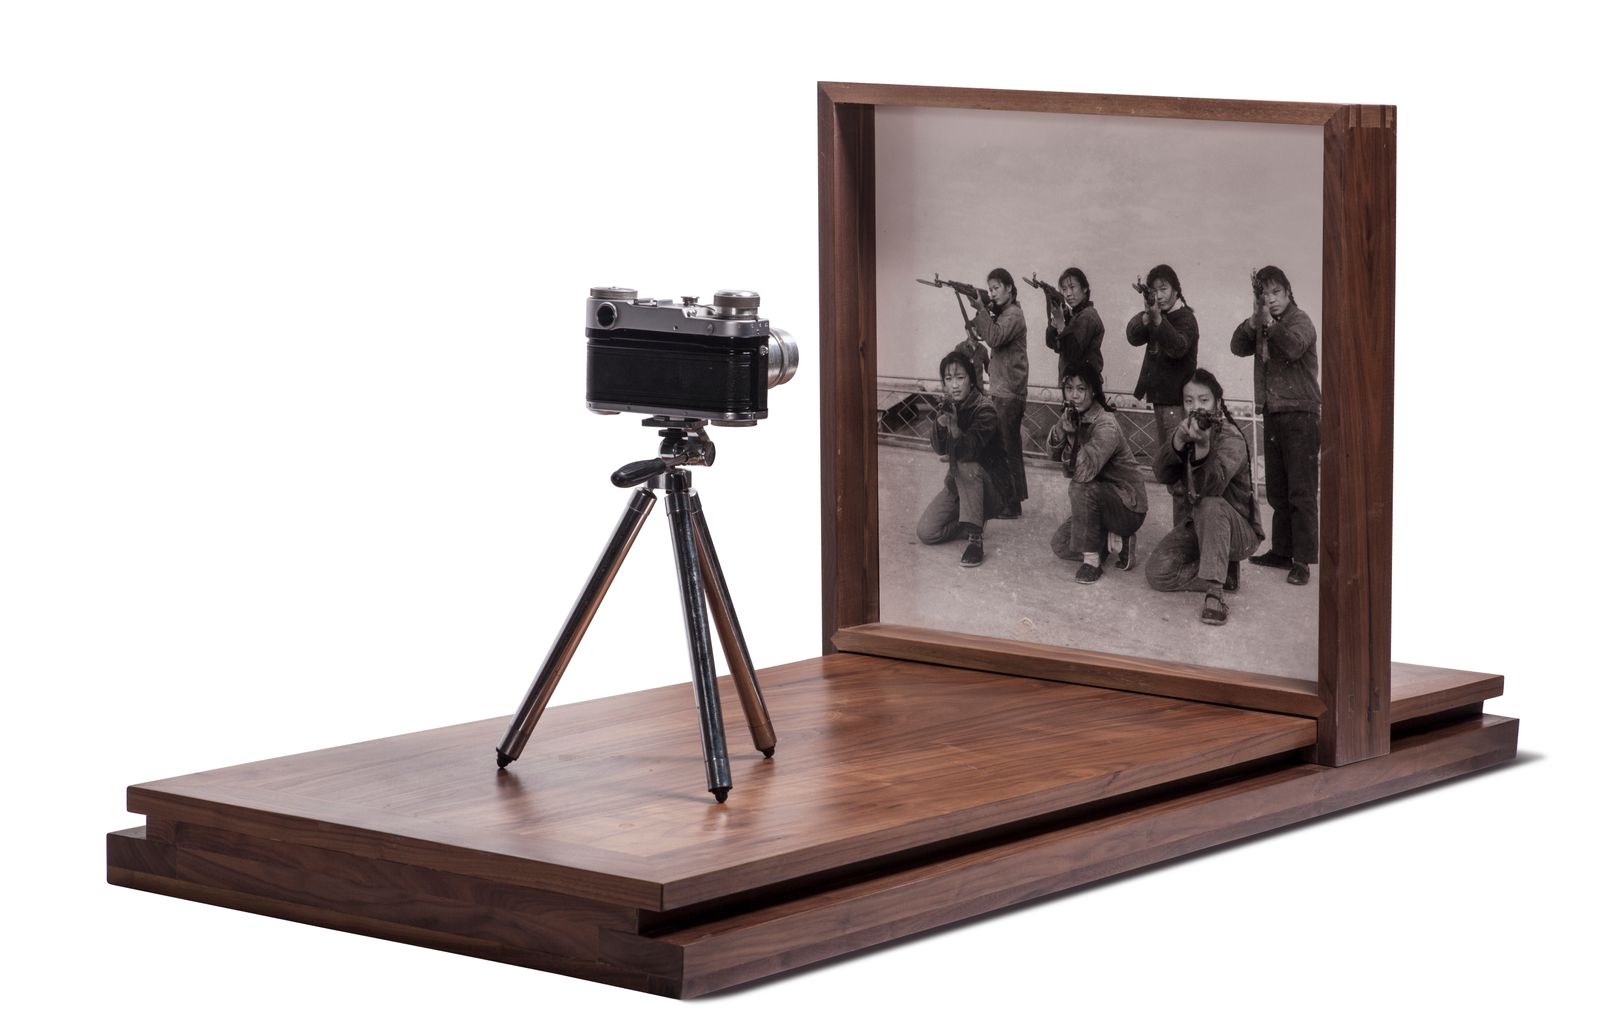 Gun, Camera, Action: Winding Back the History of Photography